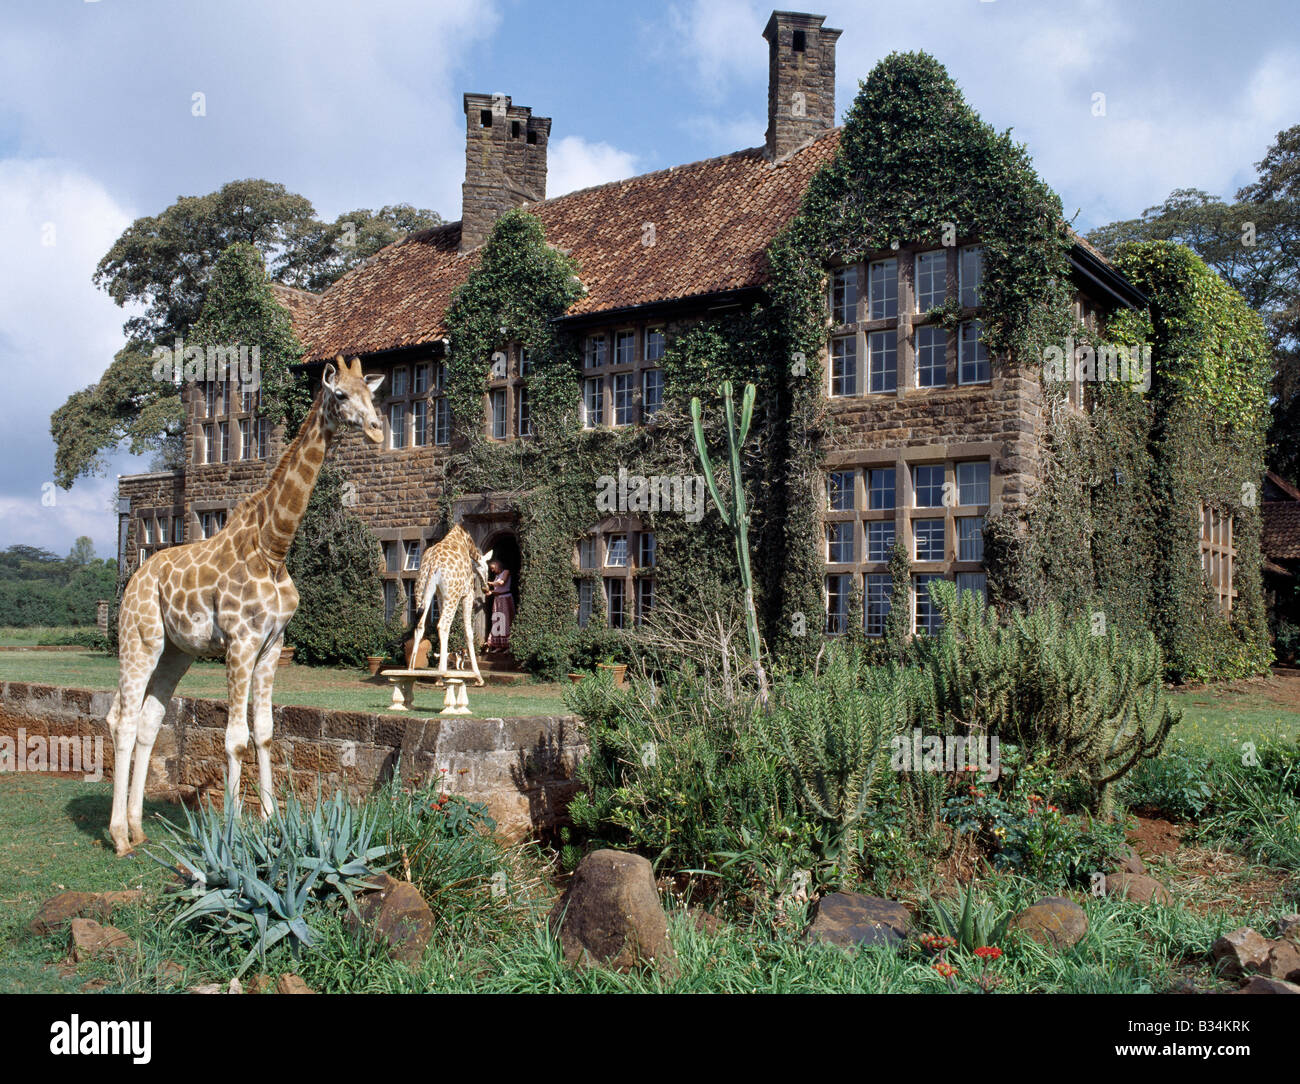 Kenya, Nairobi , The Giraffe Manor. Rothschild giraffes at The Giraffe Manor on the outskirts of Nairobi.The centre is a popular tourist destination. There are usually ten adult giraffes at the centre. When old enough, offspring are sent to other parks and private ranches. Stock Photo